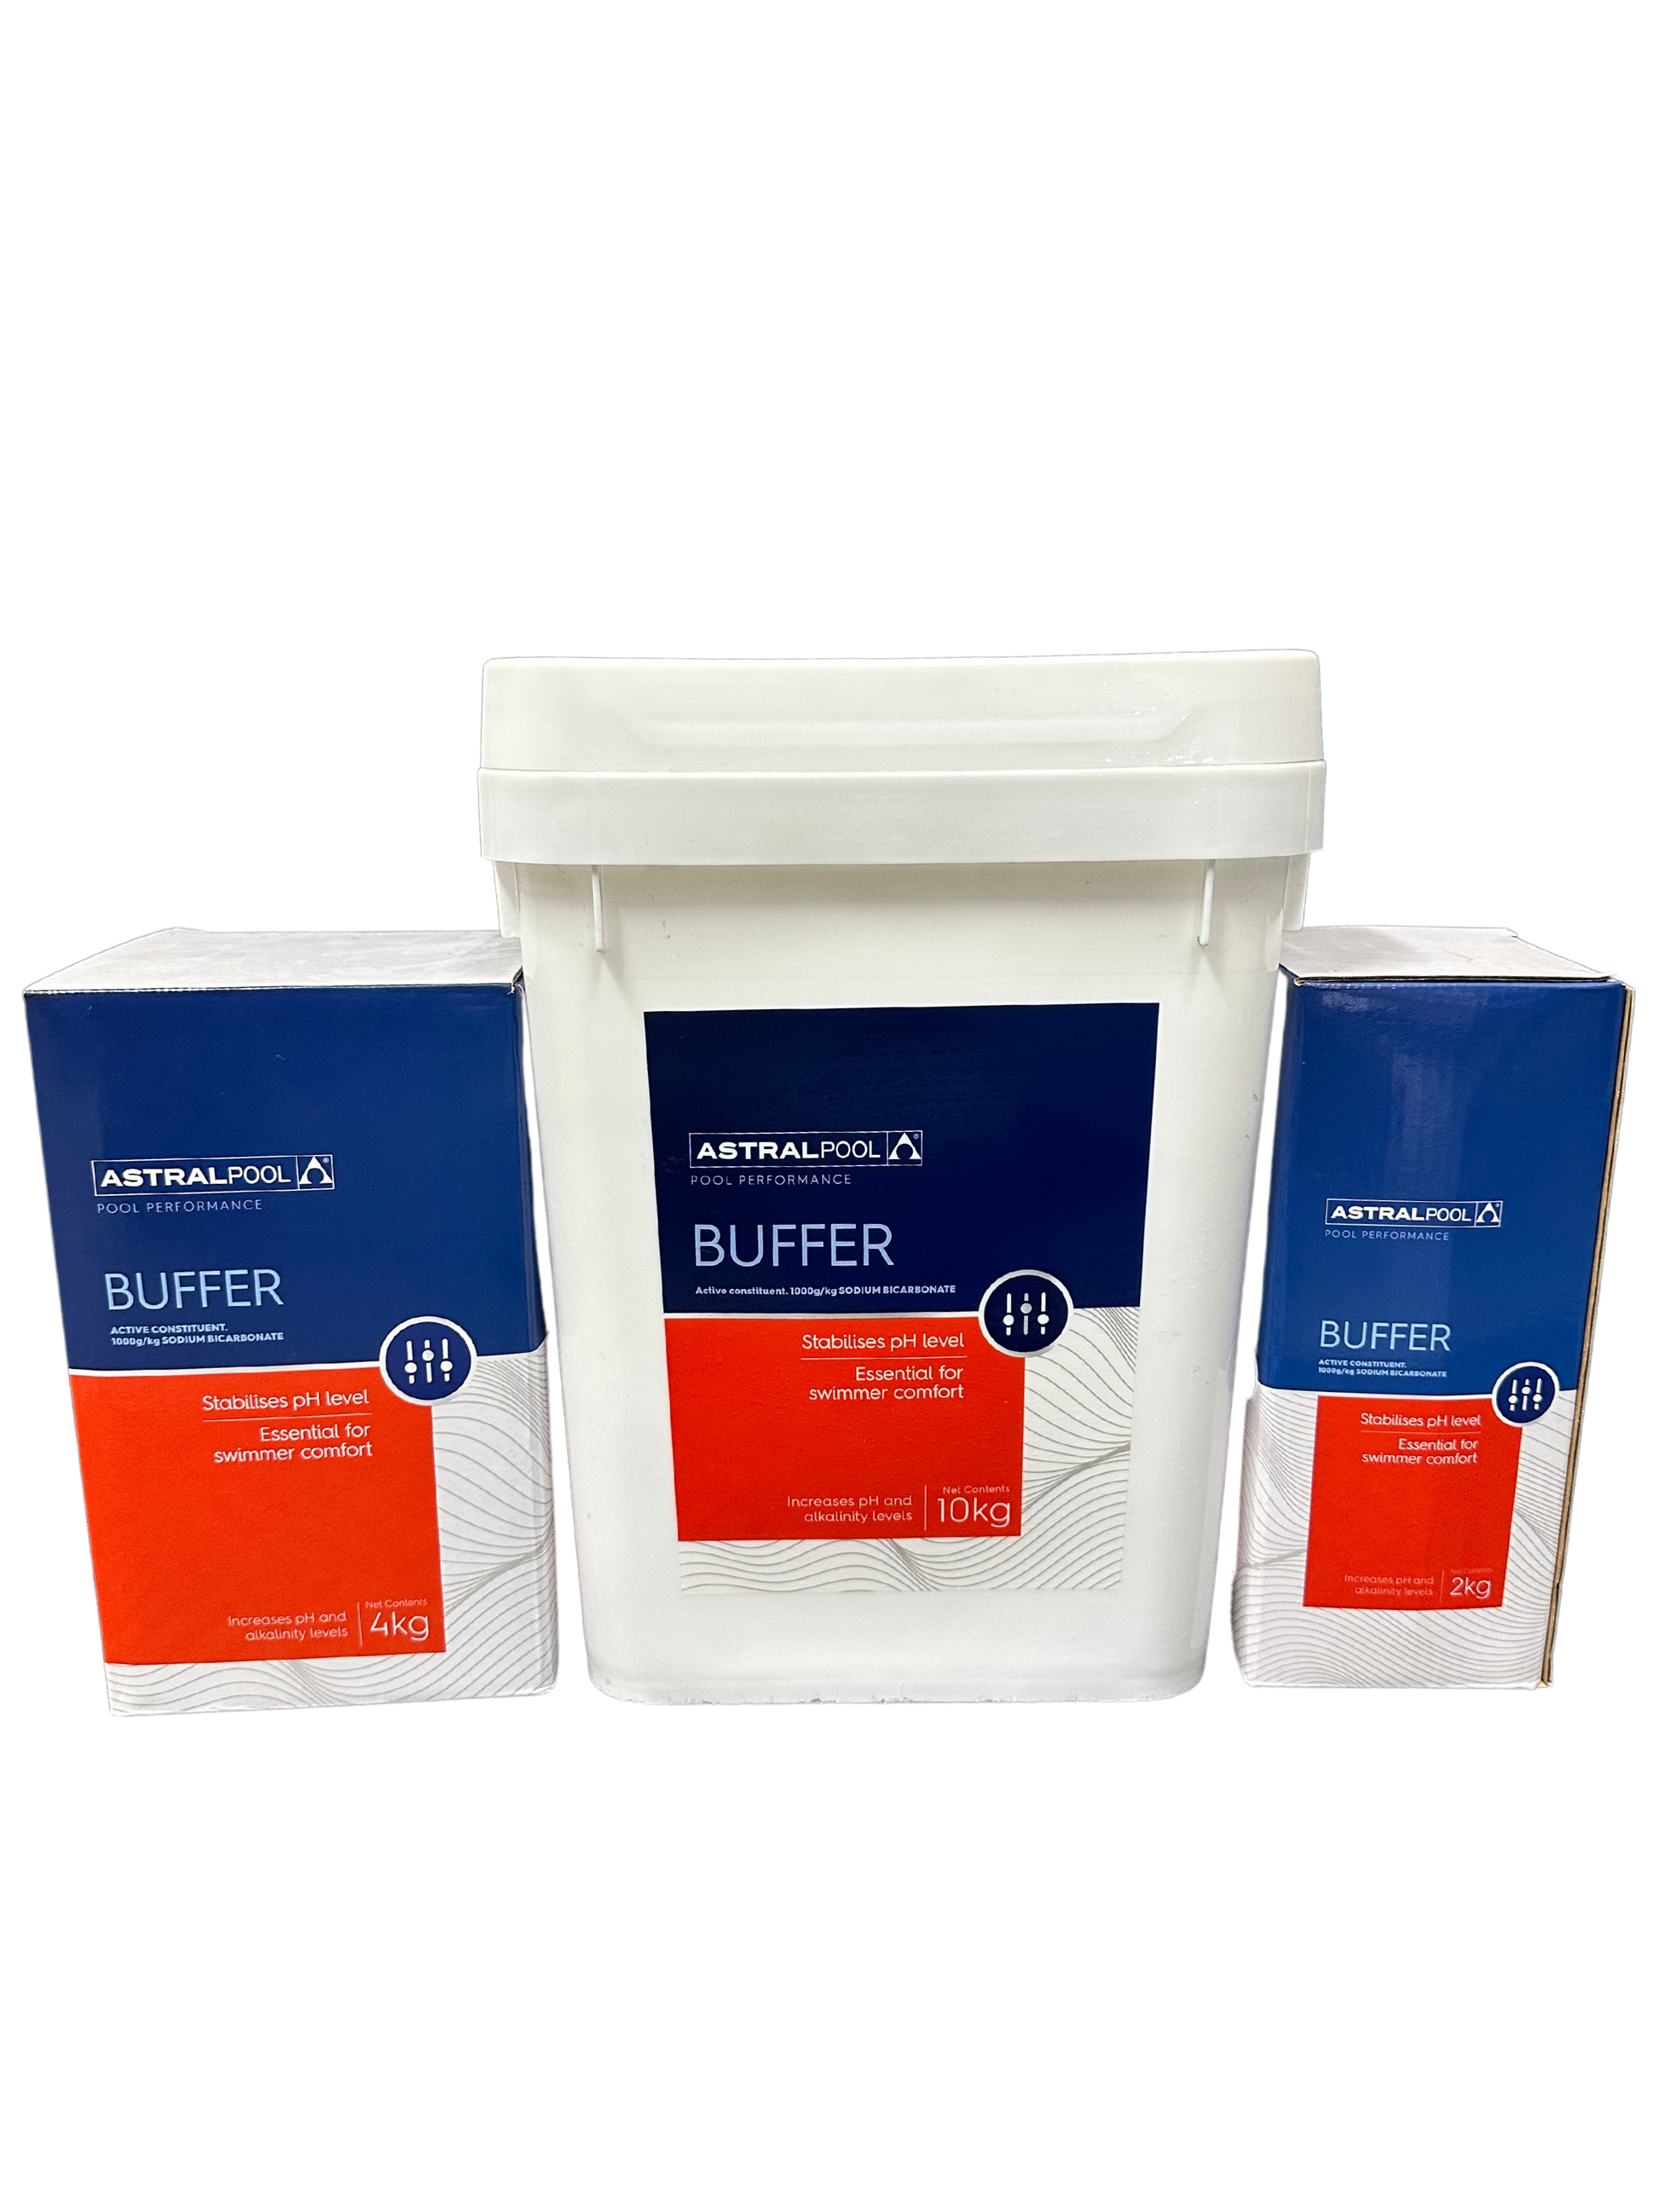 AstralPool Buffer raises total alkalinity to help maintain balanced water chemistry and reduce pH fluctuations.  Dosage per 10,000L: 200g increases Total Alkalinity by 10ppm. Mackay